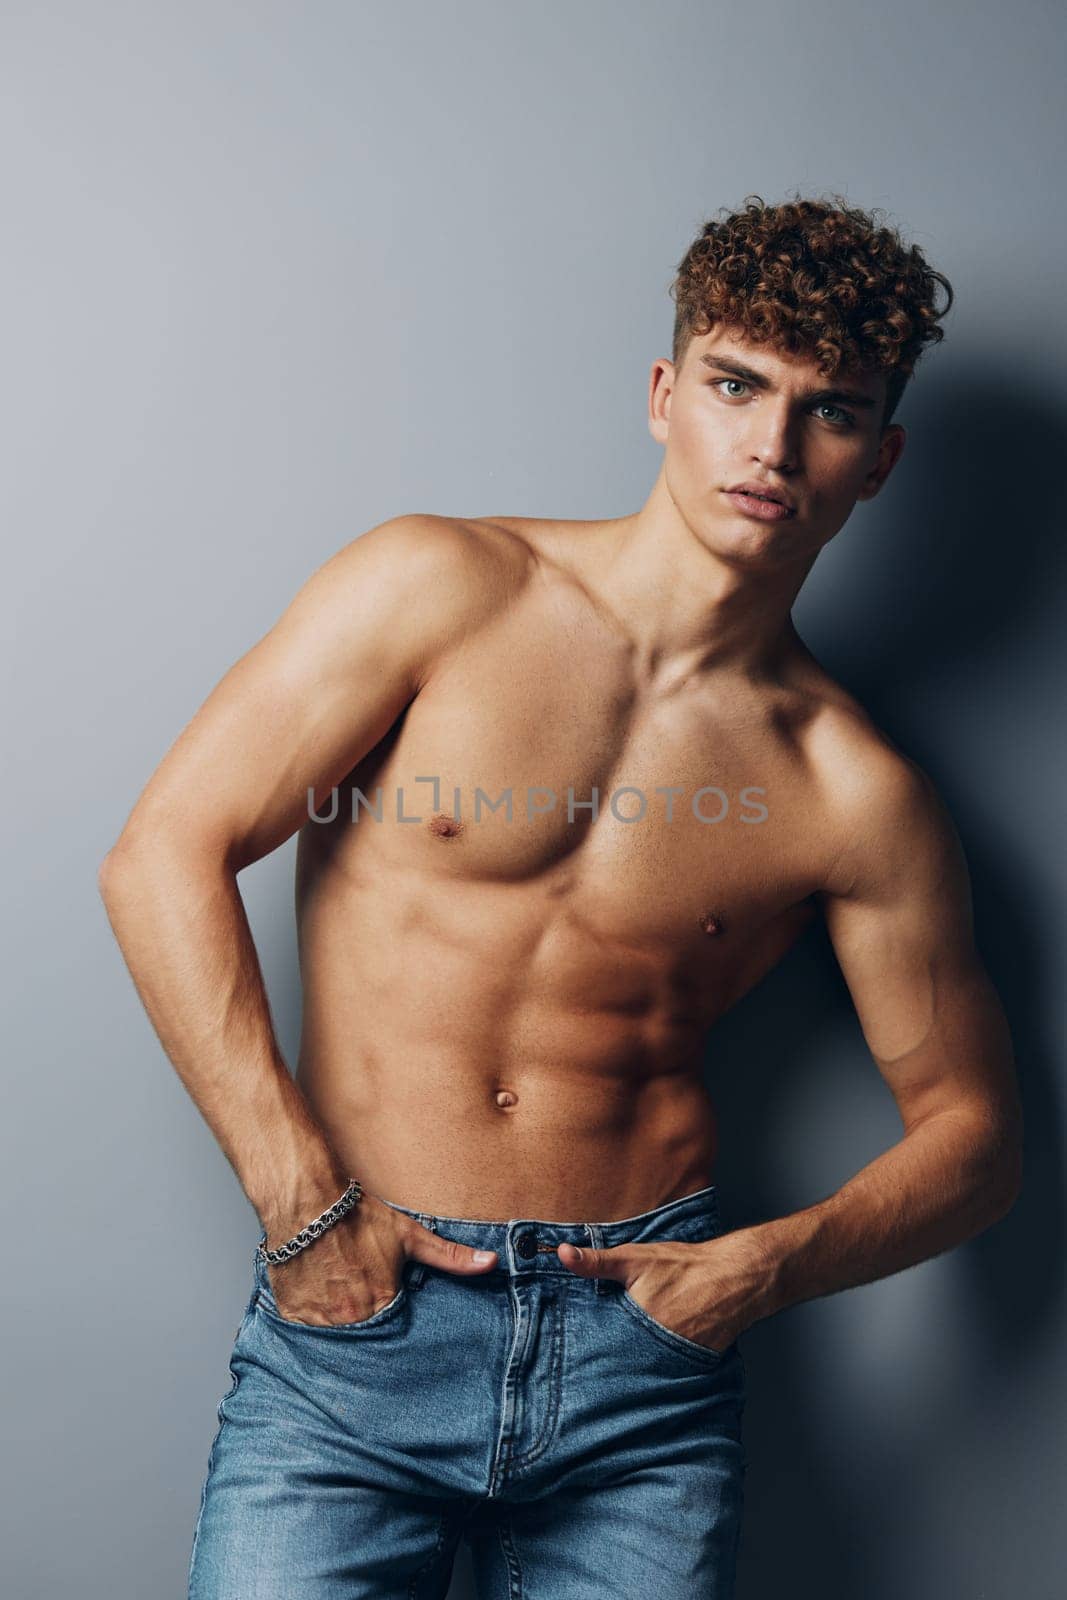 man studio athletic fit smile handsome gray gray background shirtless background athlete naked standing fashion muscular abs curly health bodybuilder male